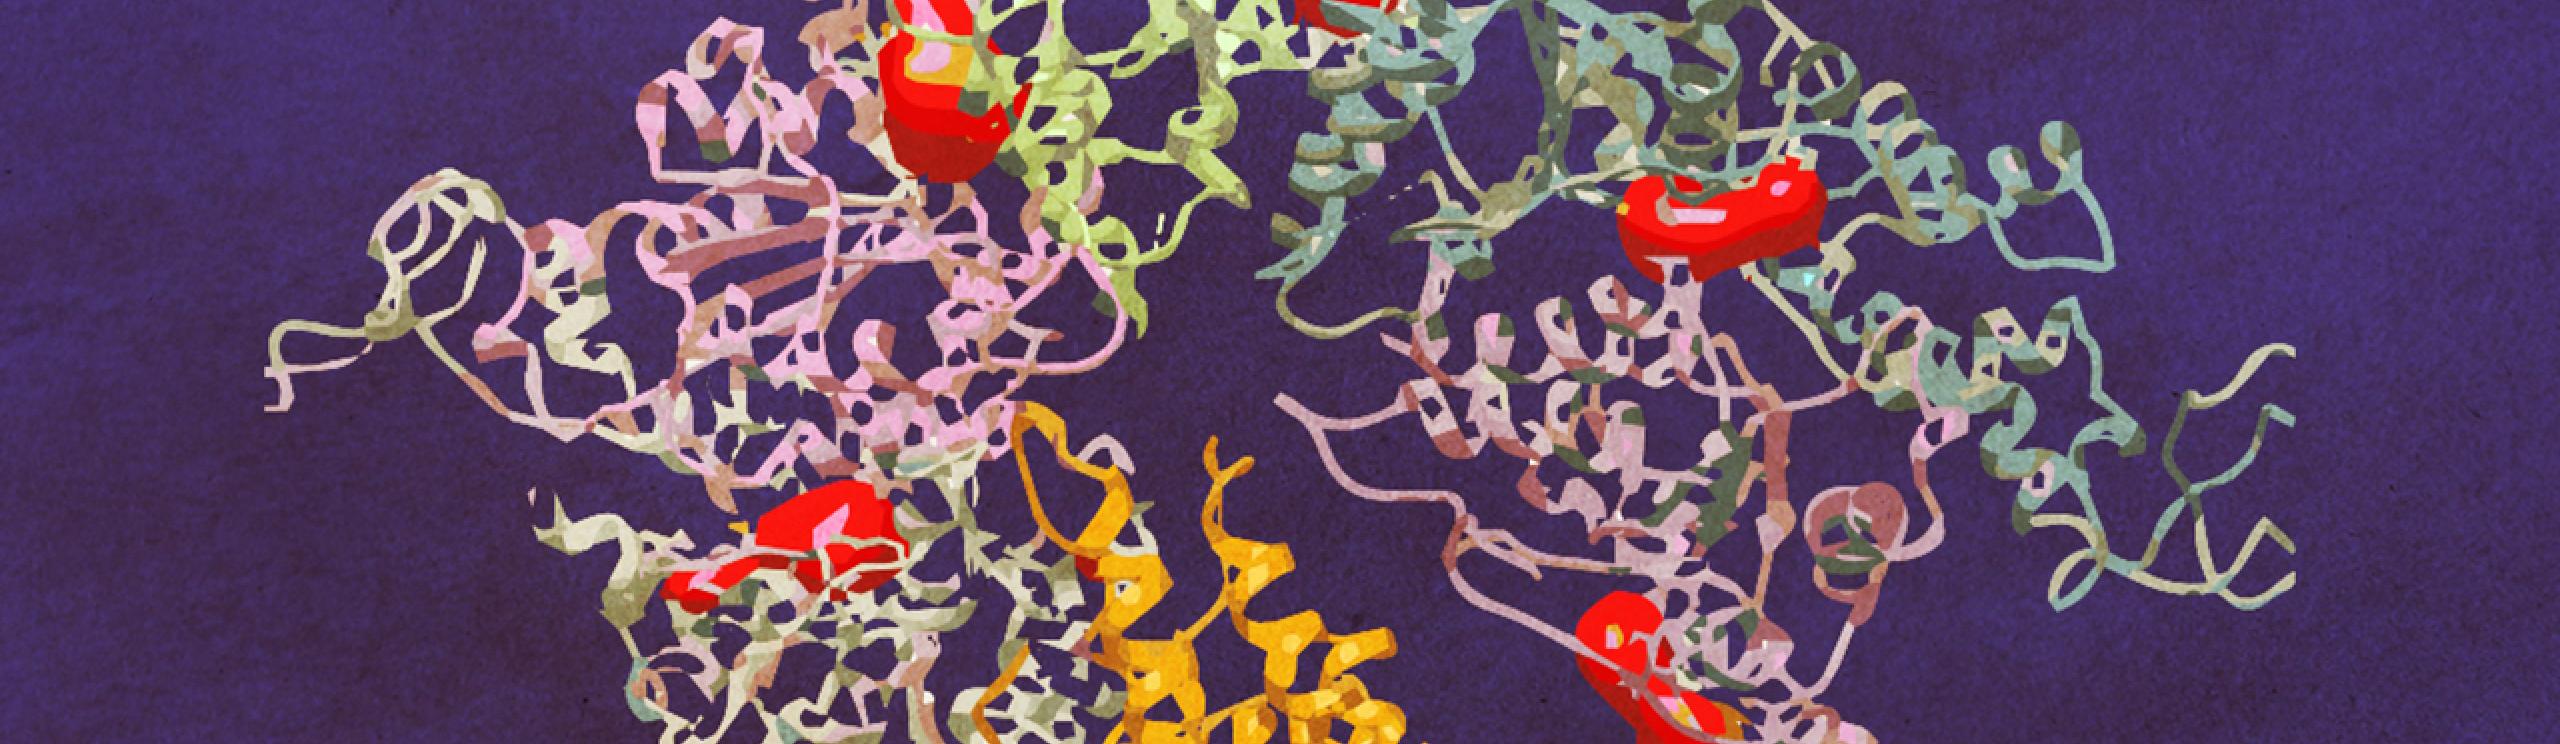 Colorful abstract proteins